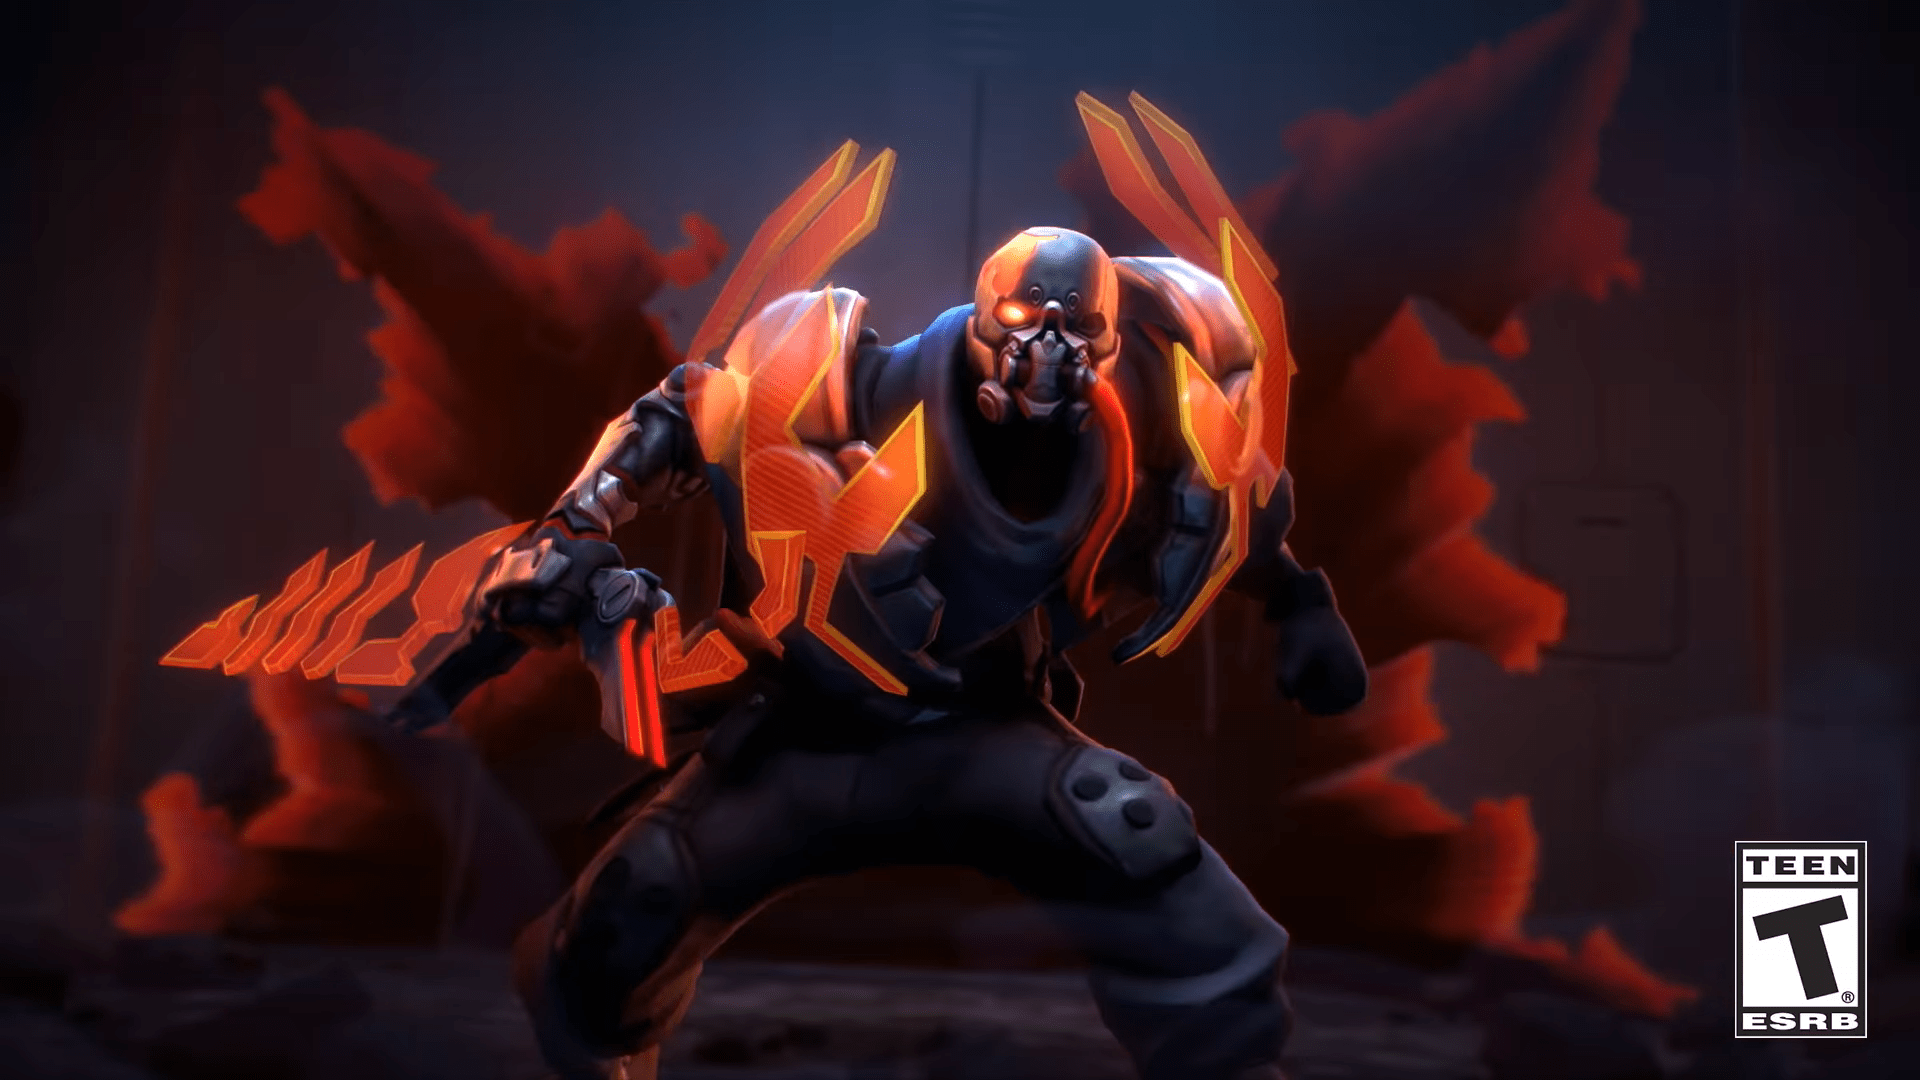 Project 2019 Event Comes To League Of Legends - League Of Legends New Skins 2019 - HD Wallpaper 